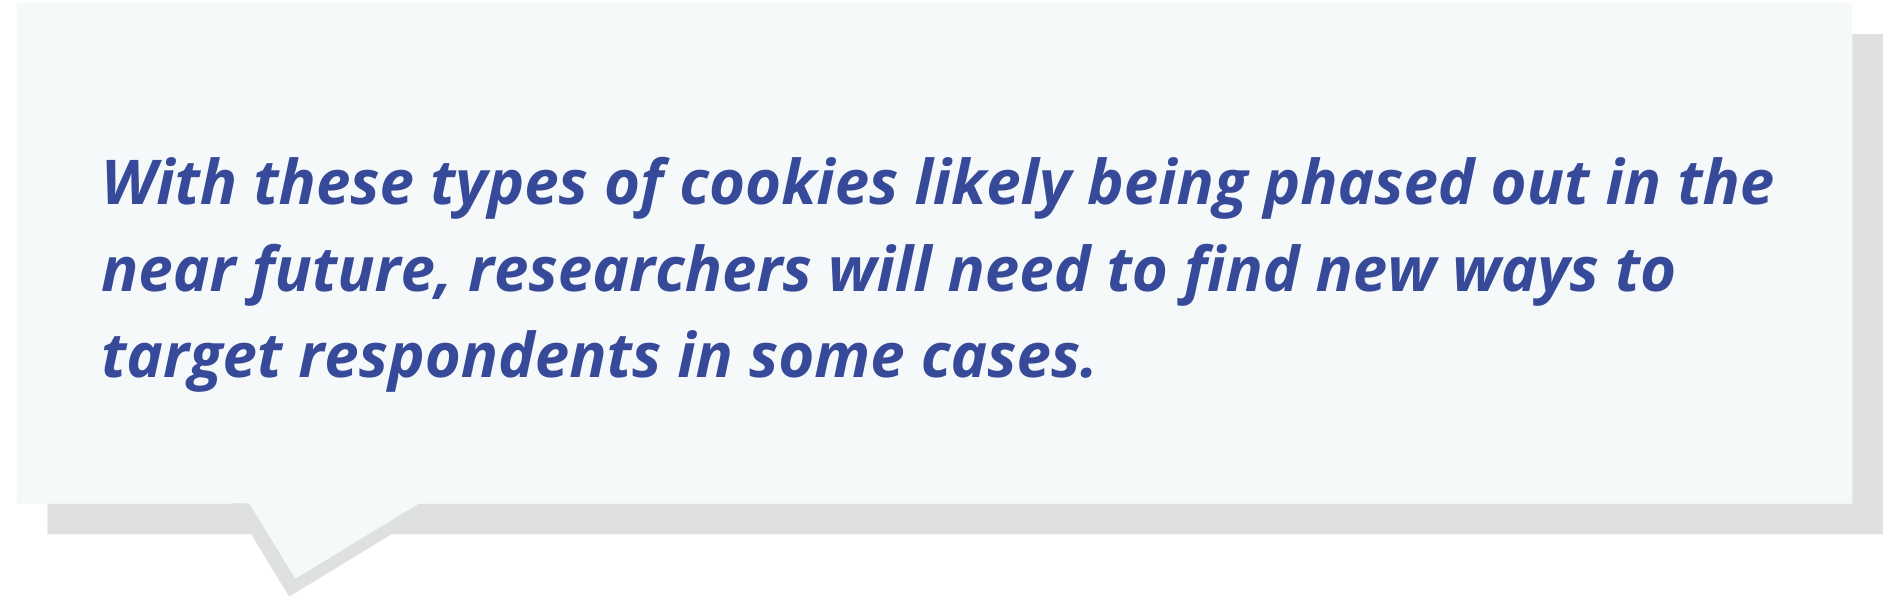 With these types of cookies likely being phased out in the near future, researchers will need to find new ways to target respondents in some cases.